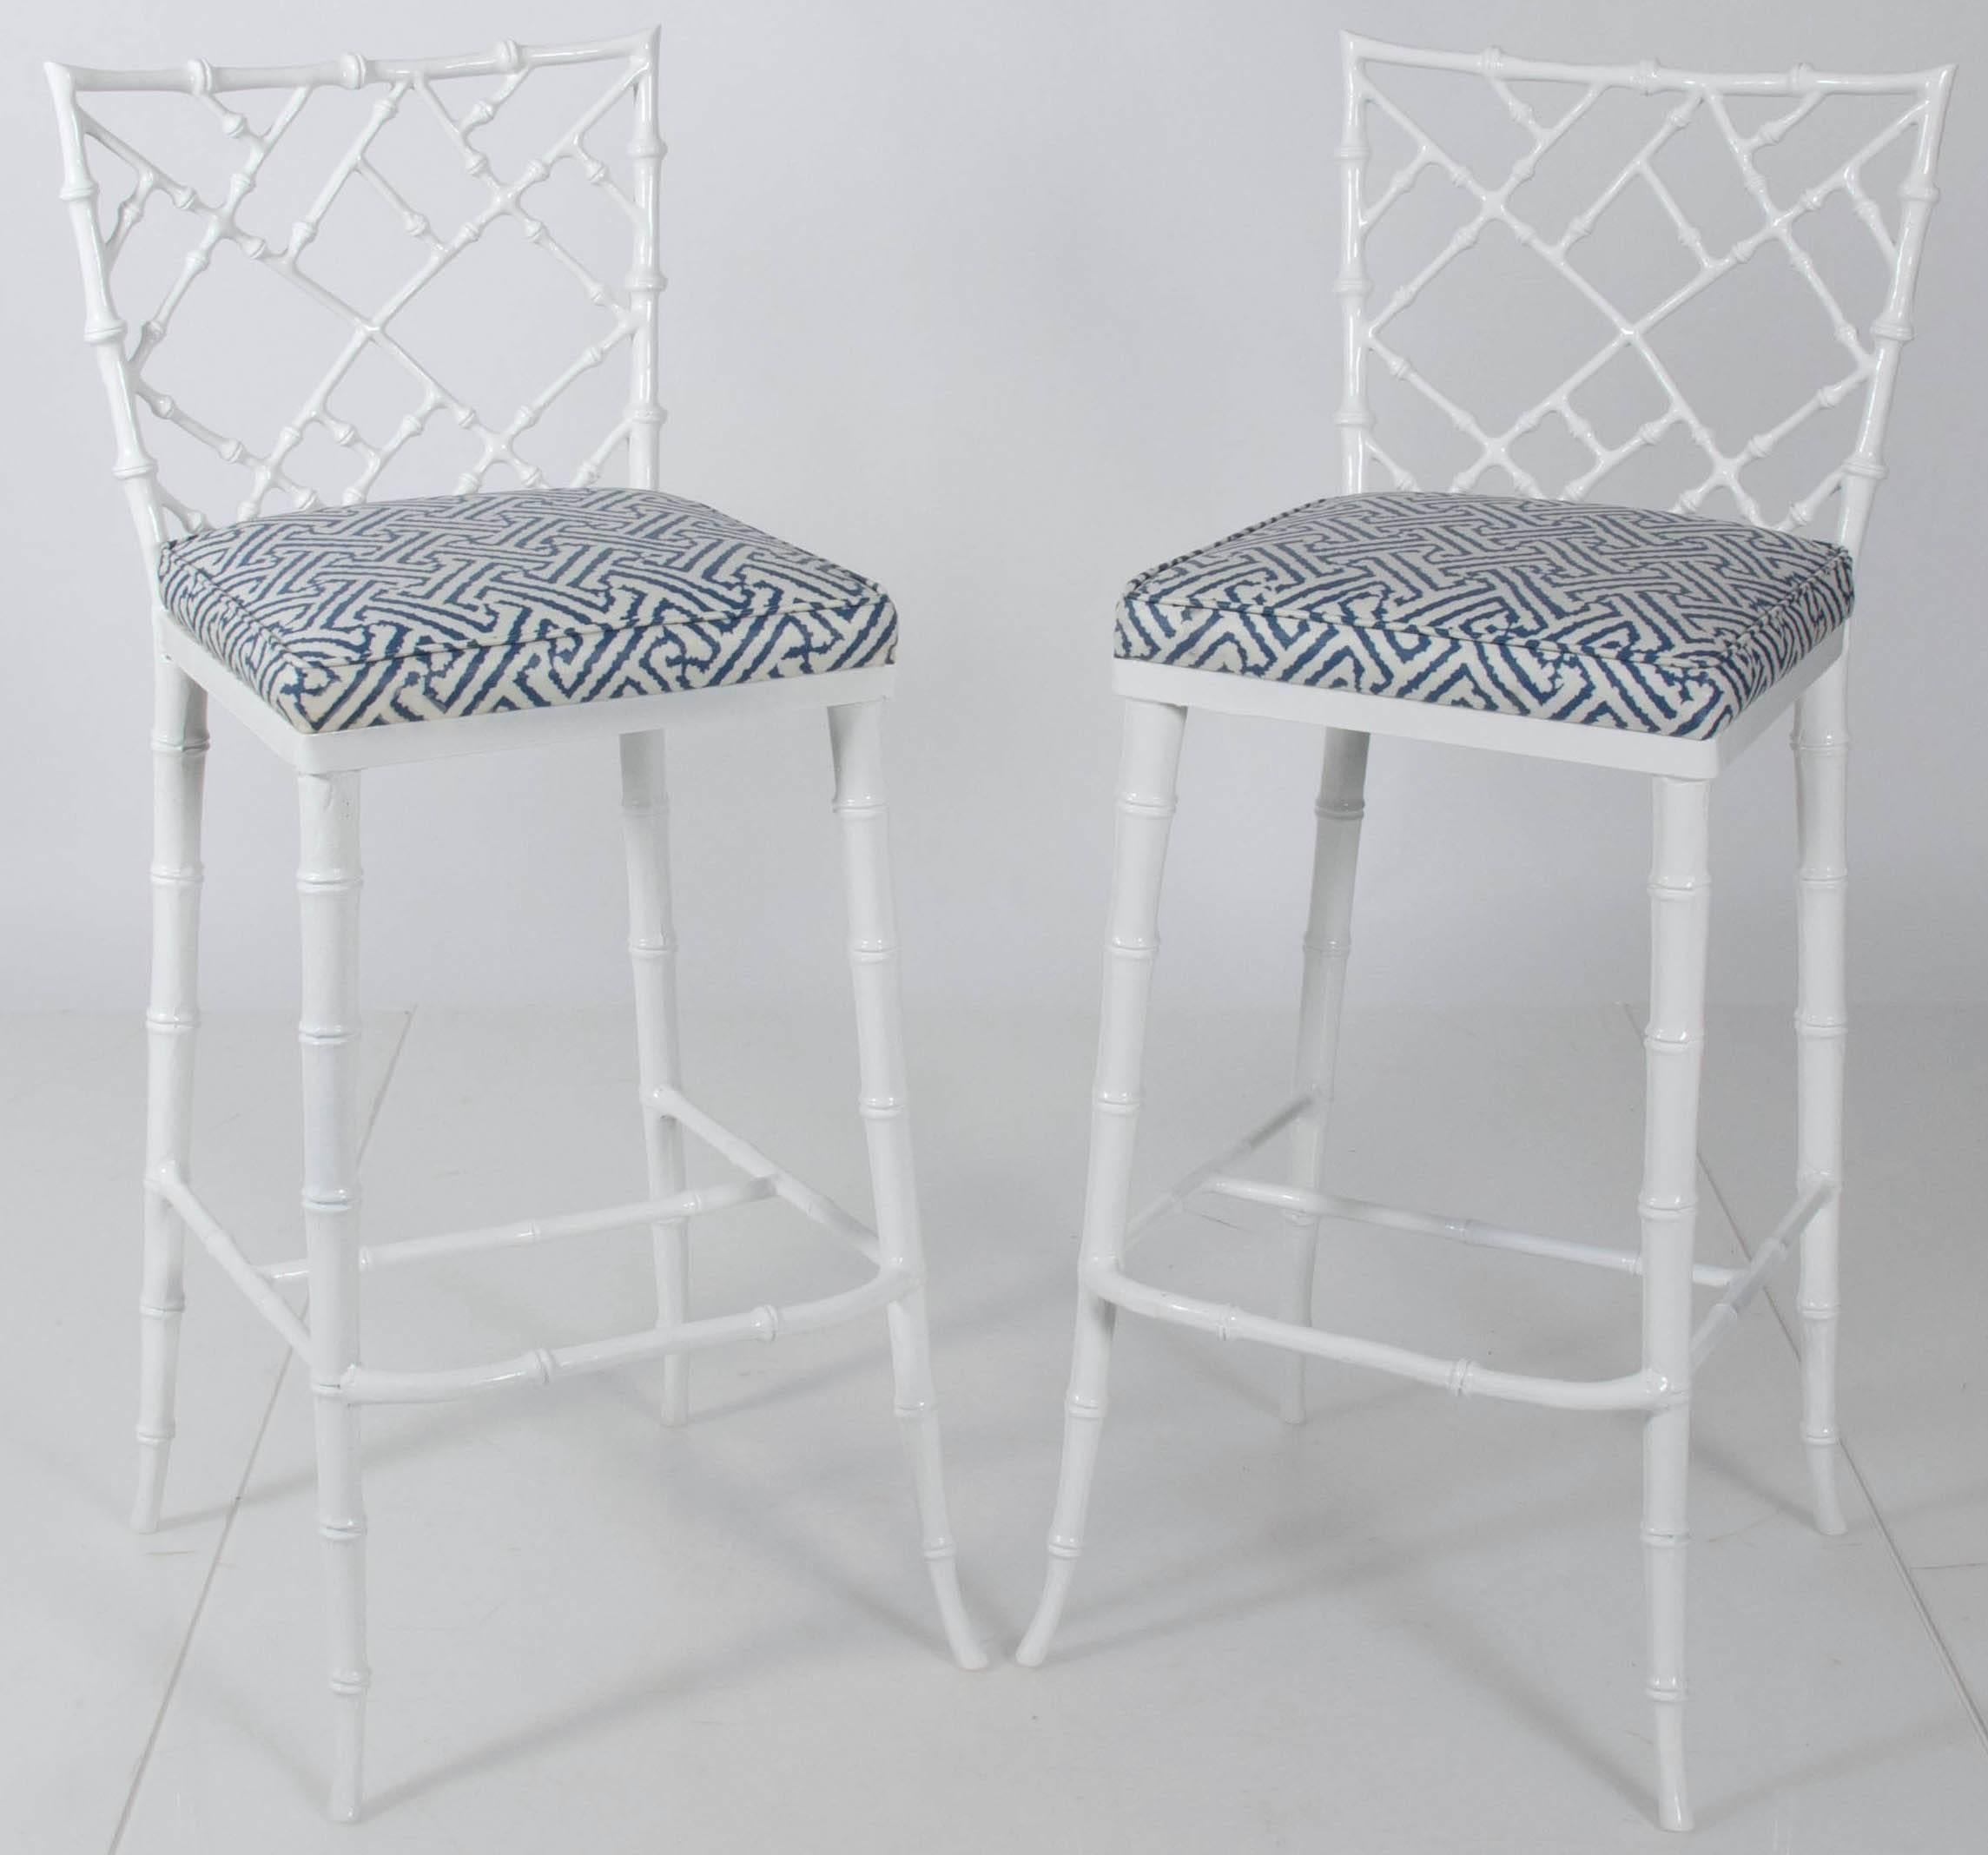 Pair of Phyllis Morris faux-bamboo tall metal barstools. Newly powder coated in gloss white. Upholstered in Quadrille 'Java Grande' in medium blue/white. Fabric has been clear-coated to repel stains. Suitable for indoor/outdoor use.